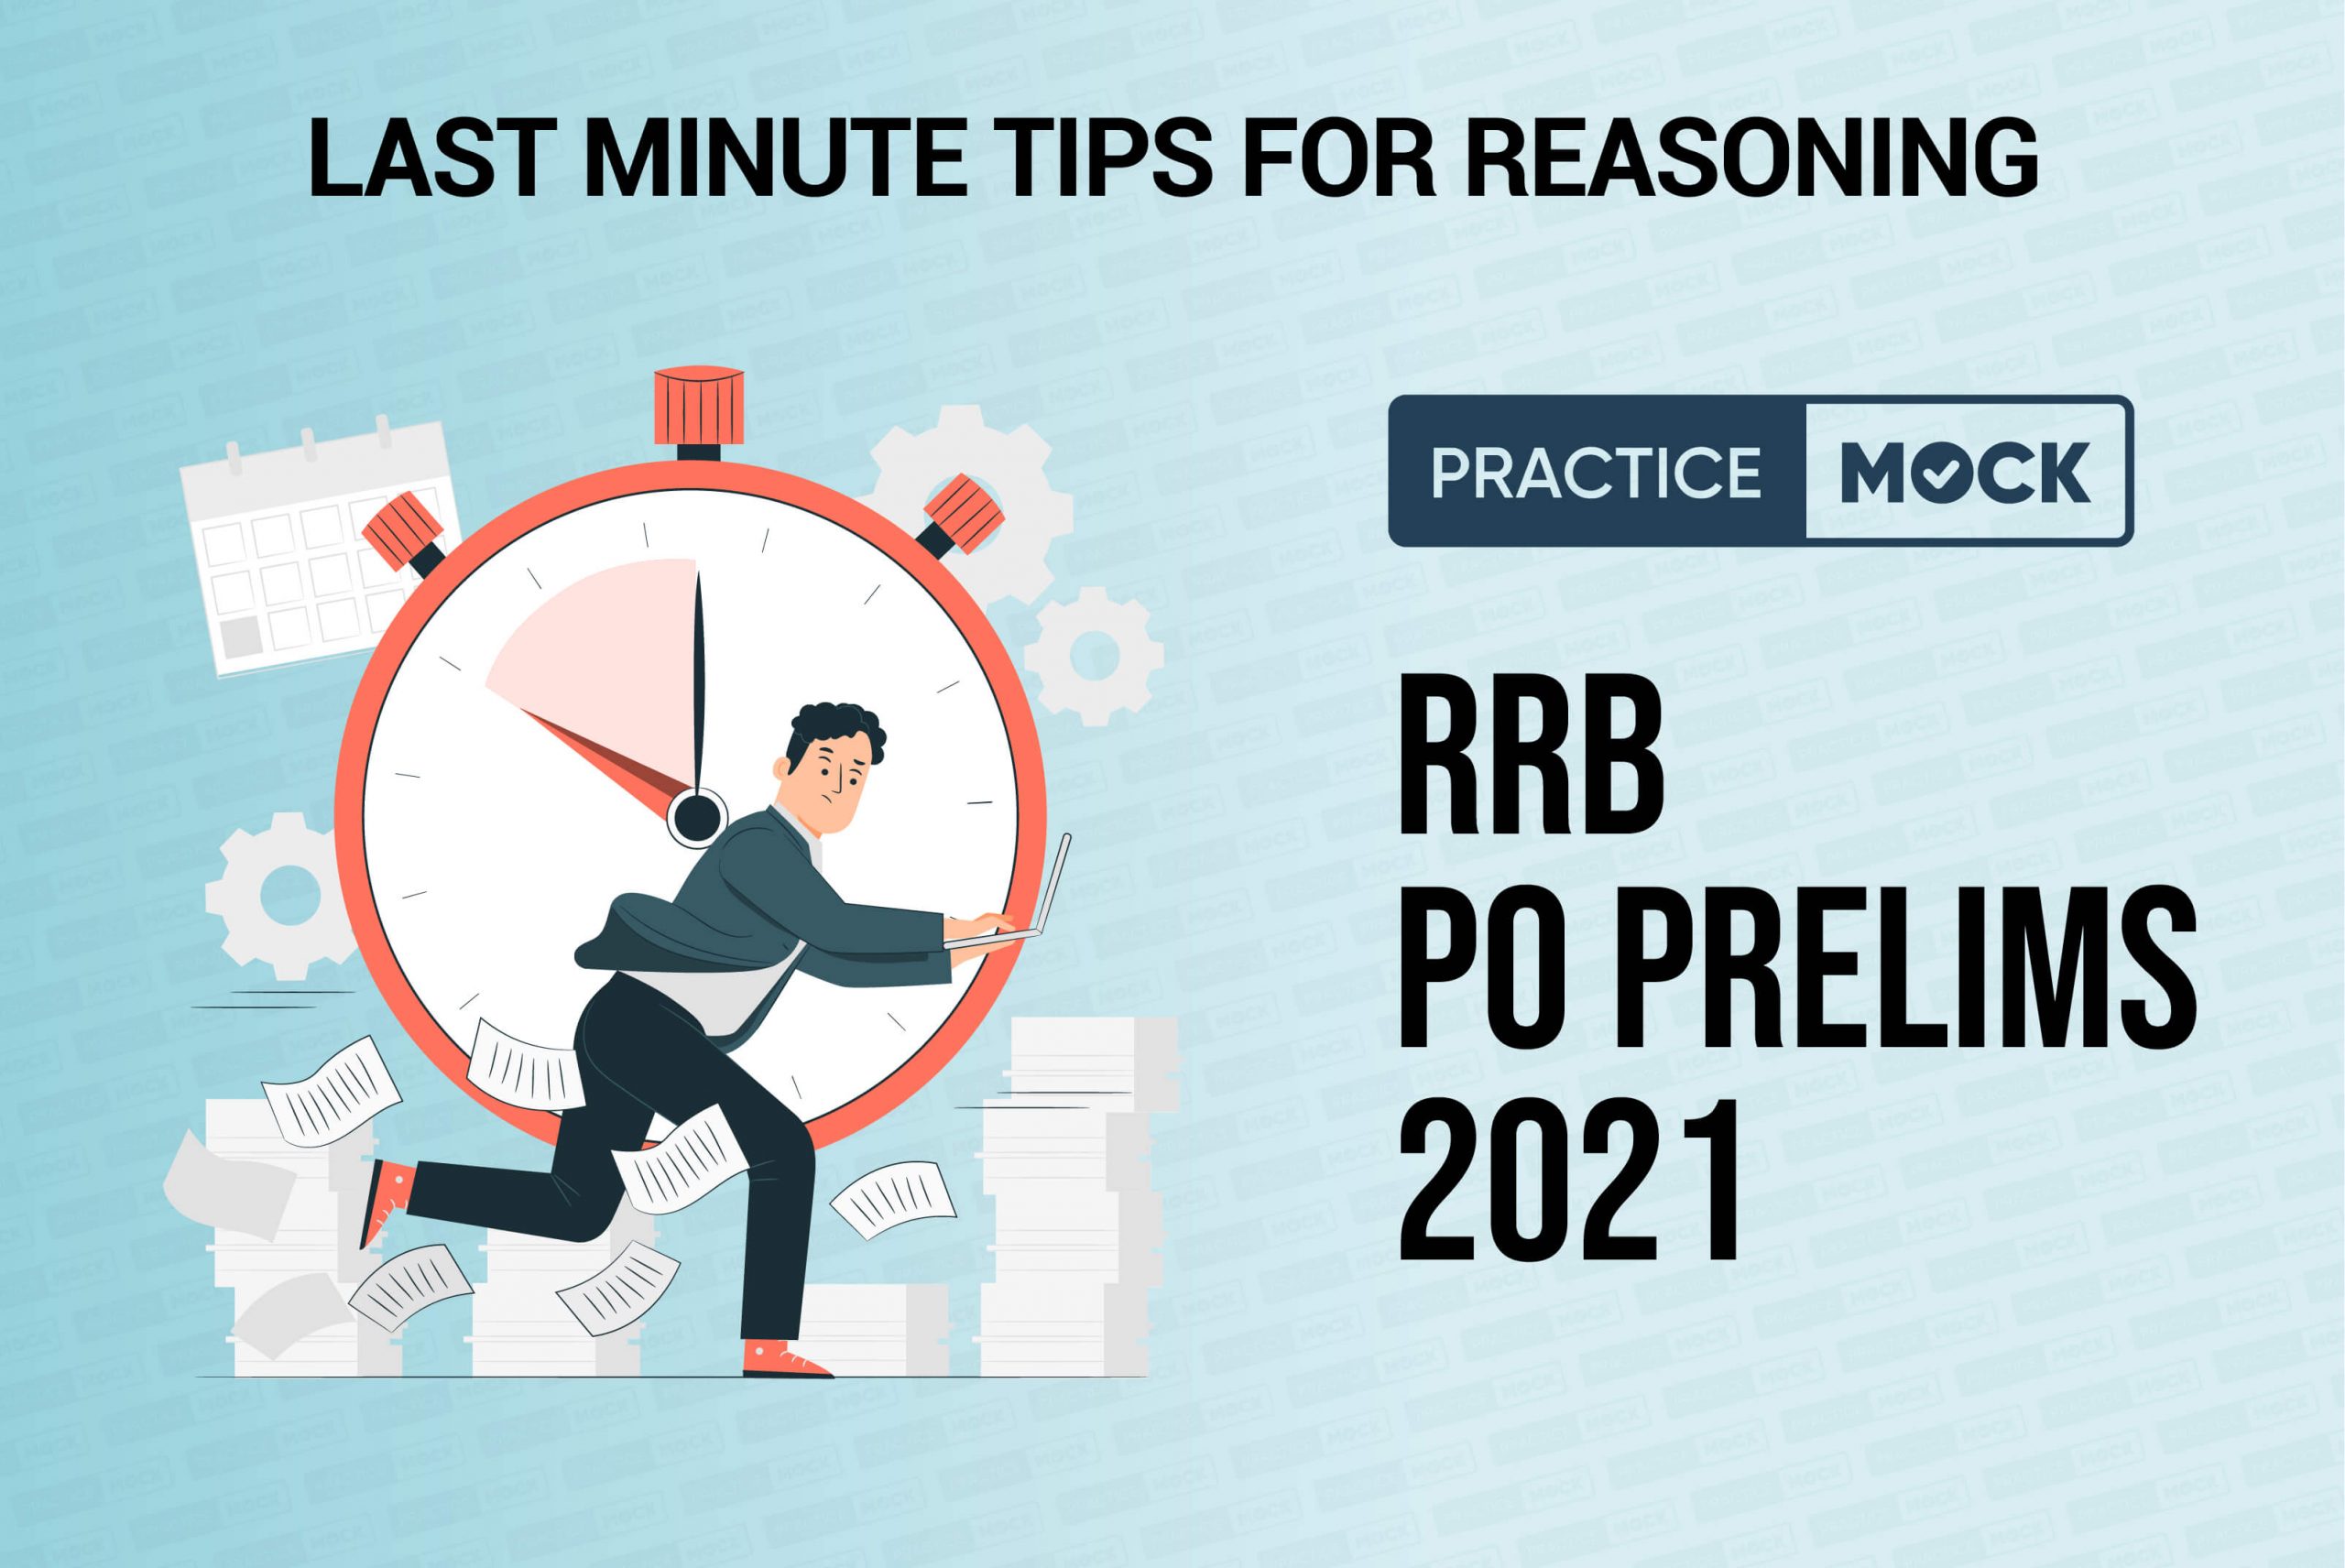 Last Minute Tips for Reasoning-RRB PO Prelims 2021